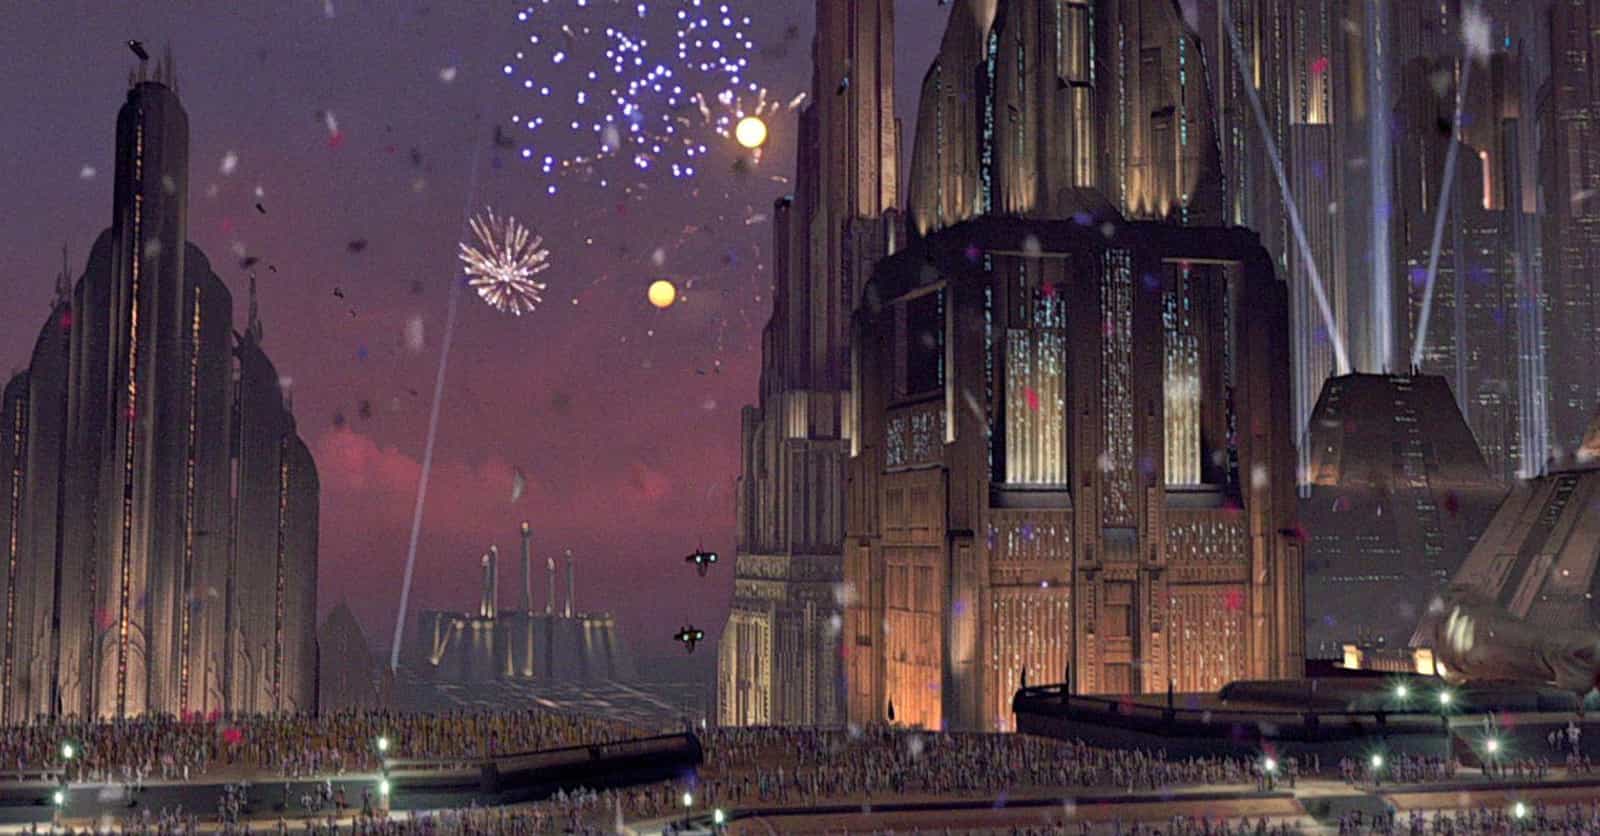 15 Things You Didn't Know About Coruscant: The Center Of The 'Star Wars' Galaxy